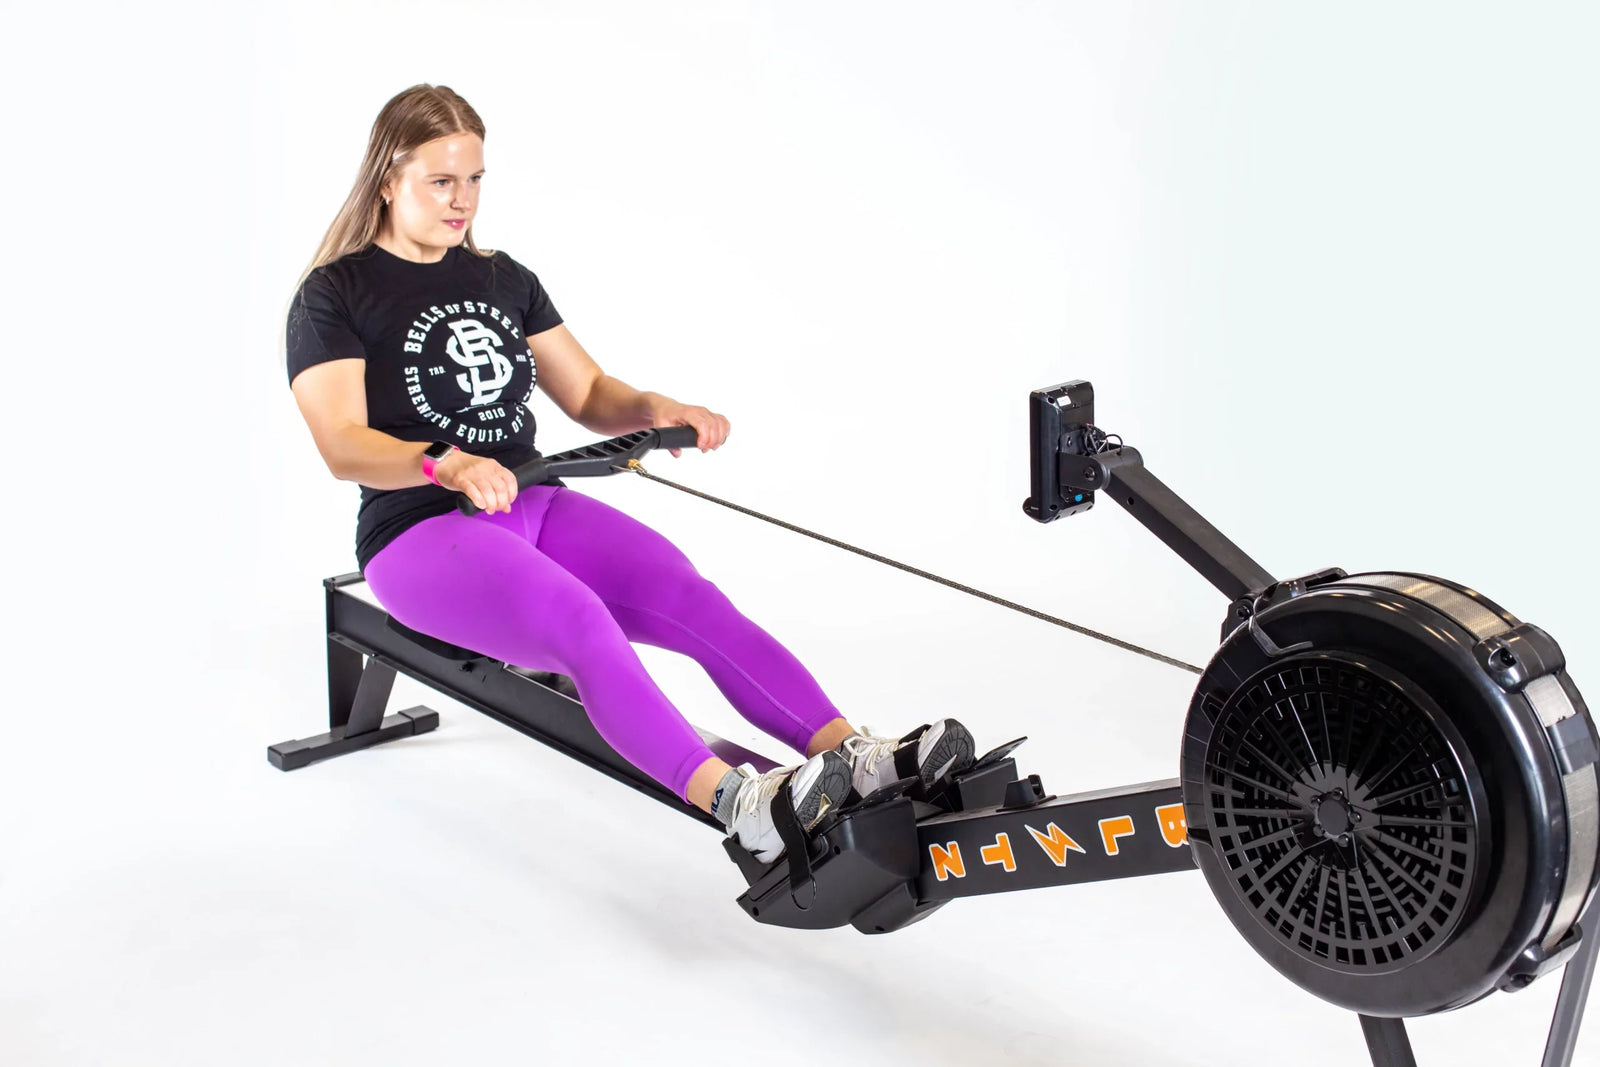 Rowing for active rest workout